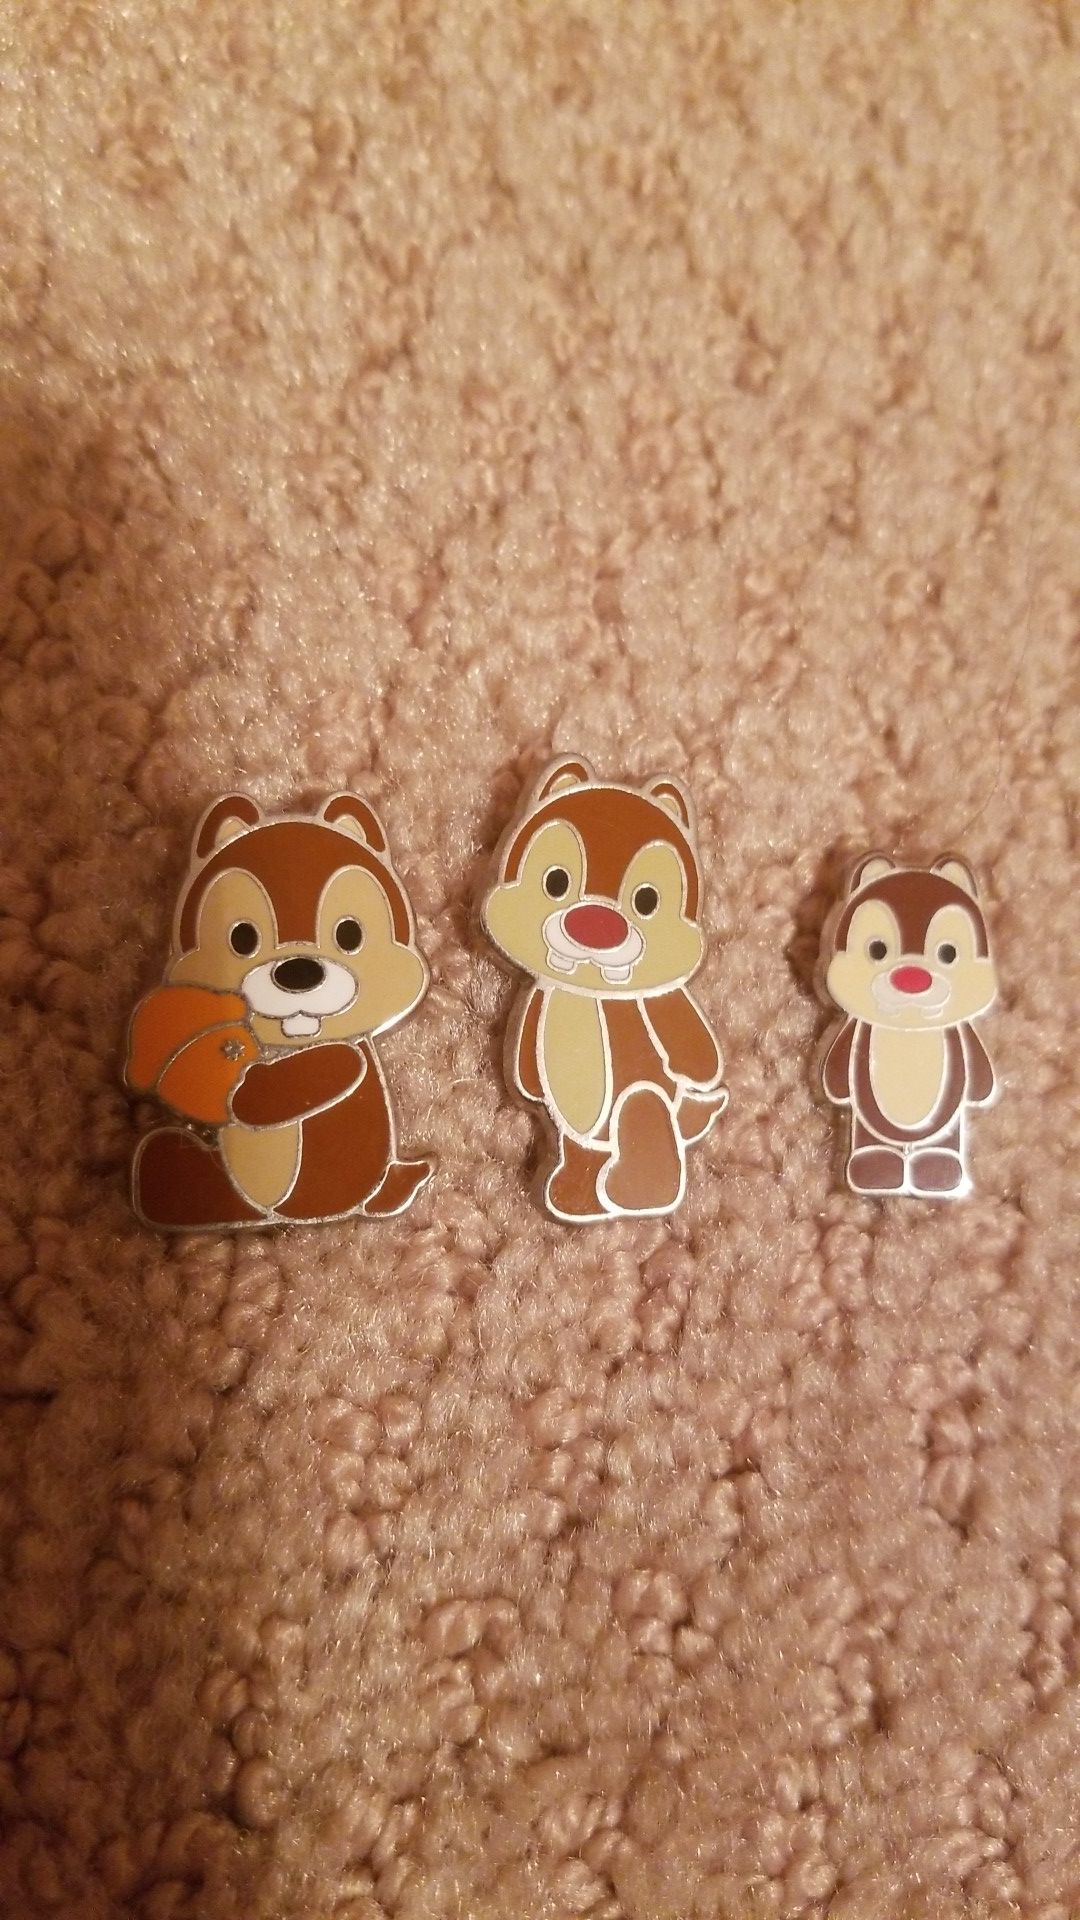 Disney 2 Pin lot Chip and Dale Holding A Nut and extra Dale pin